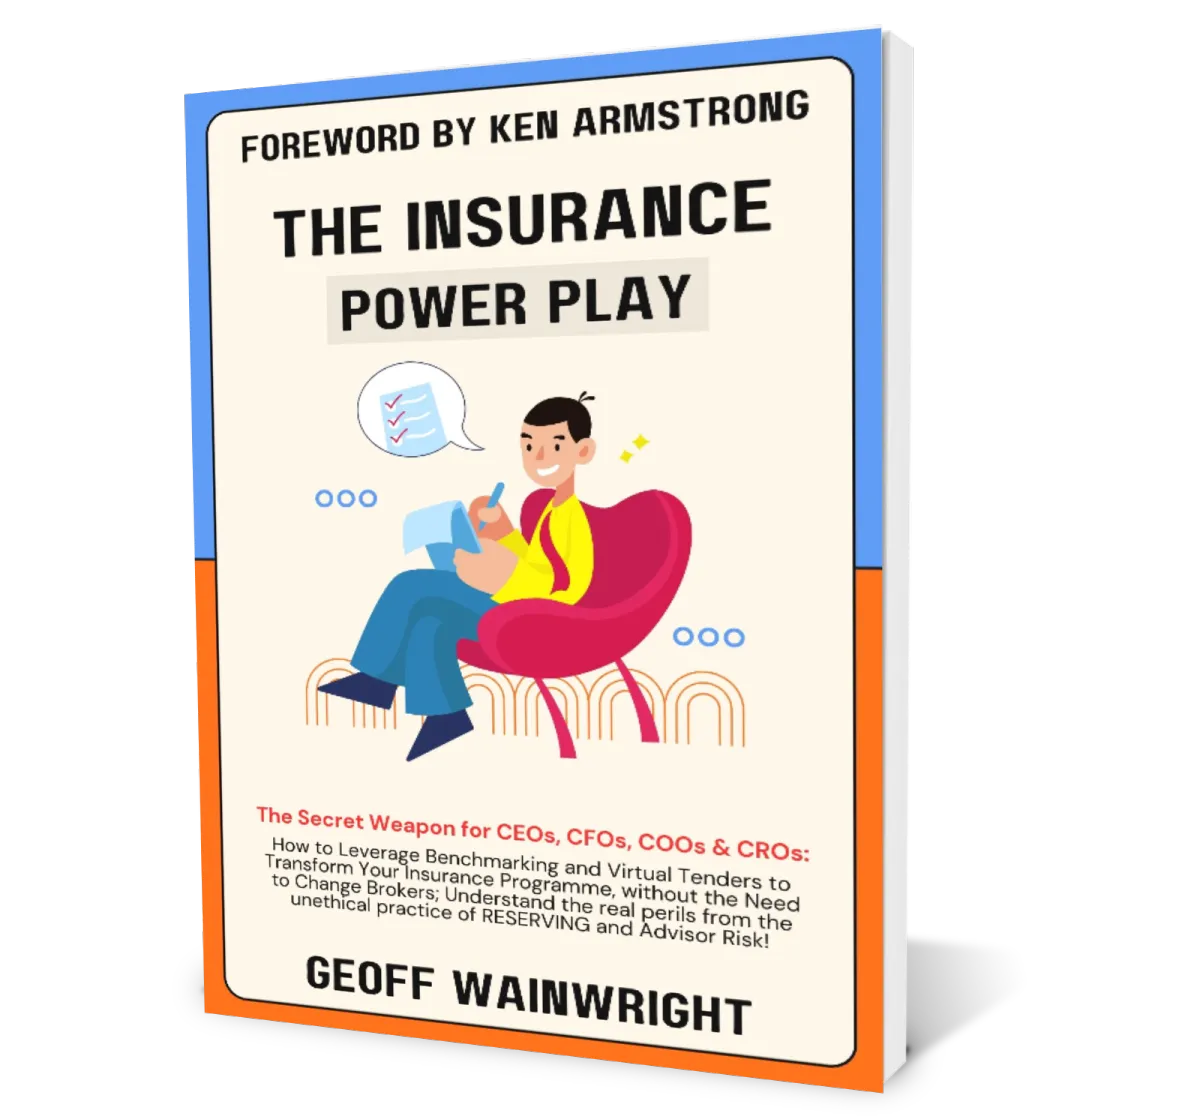 Cover of 'The Insurance Power Play' by Geoff Wainwright